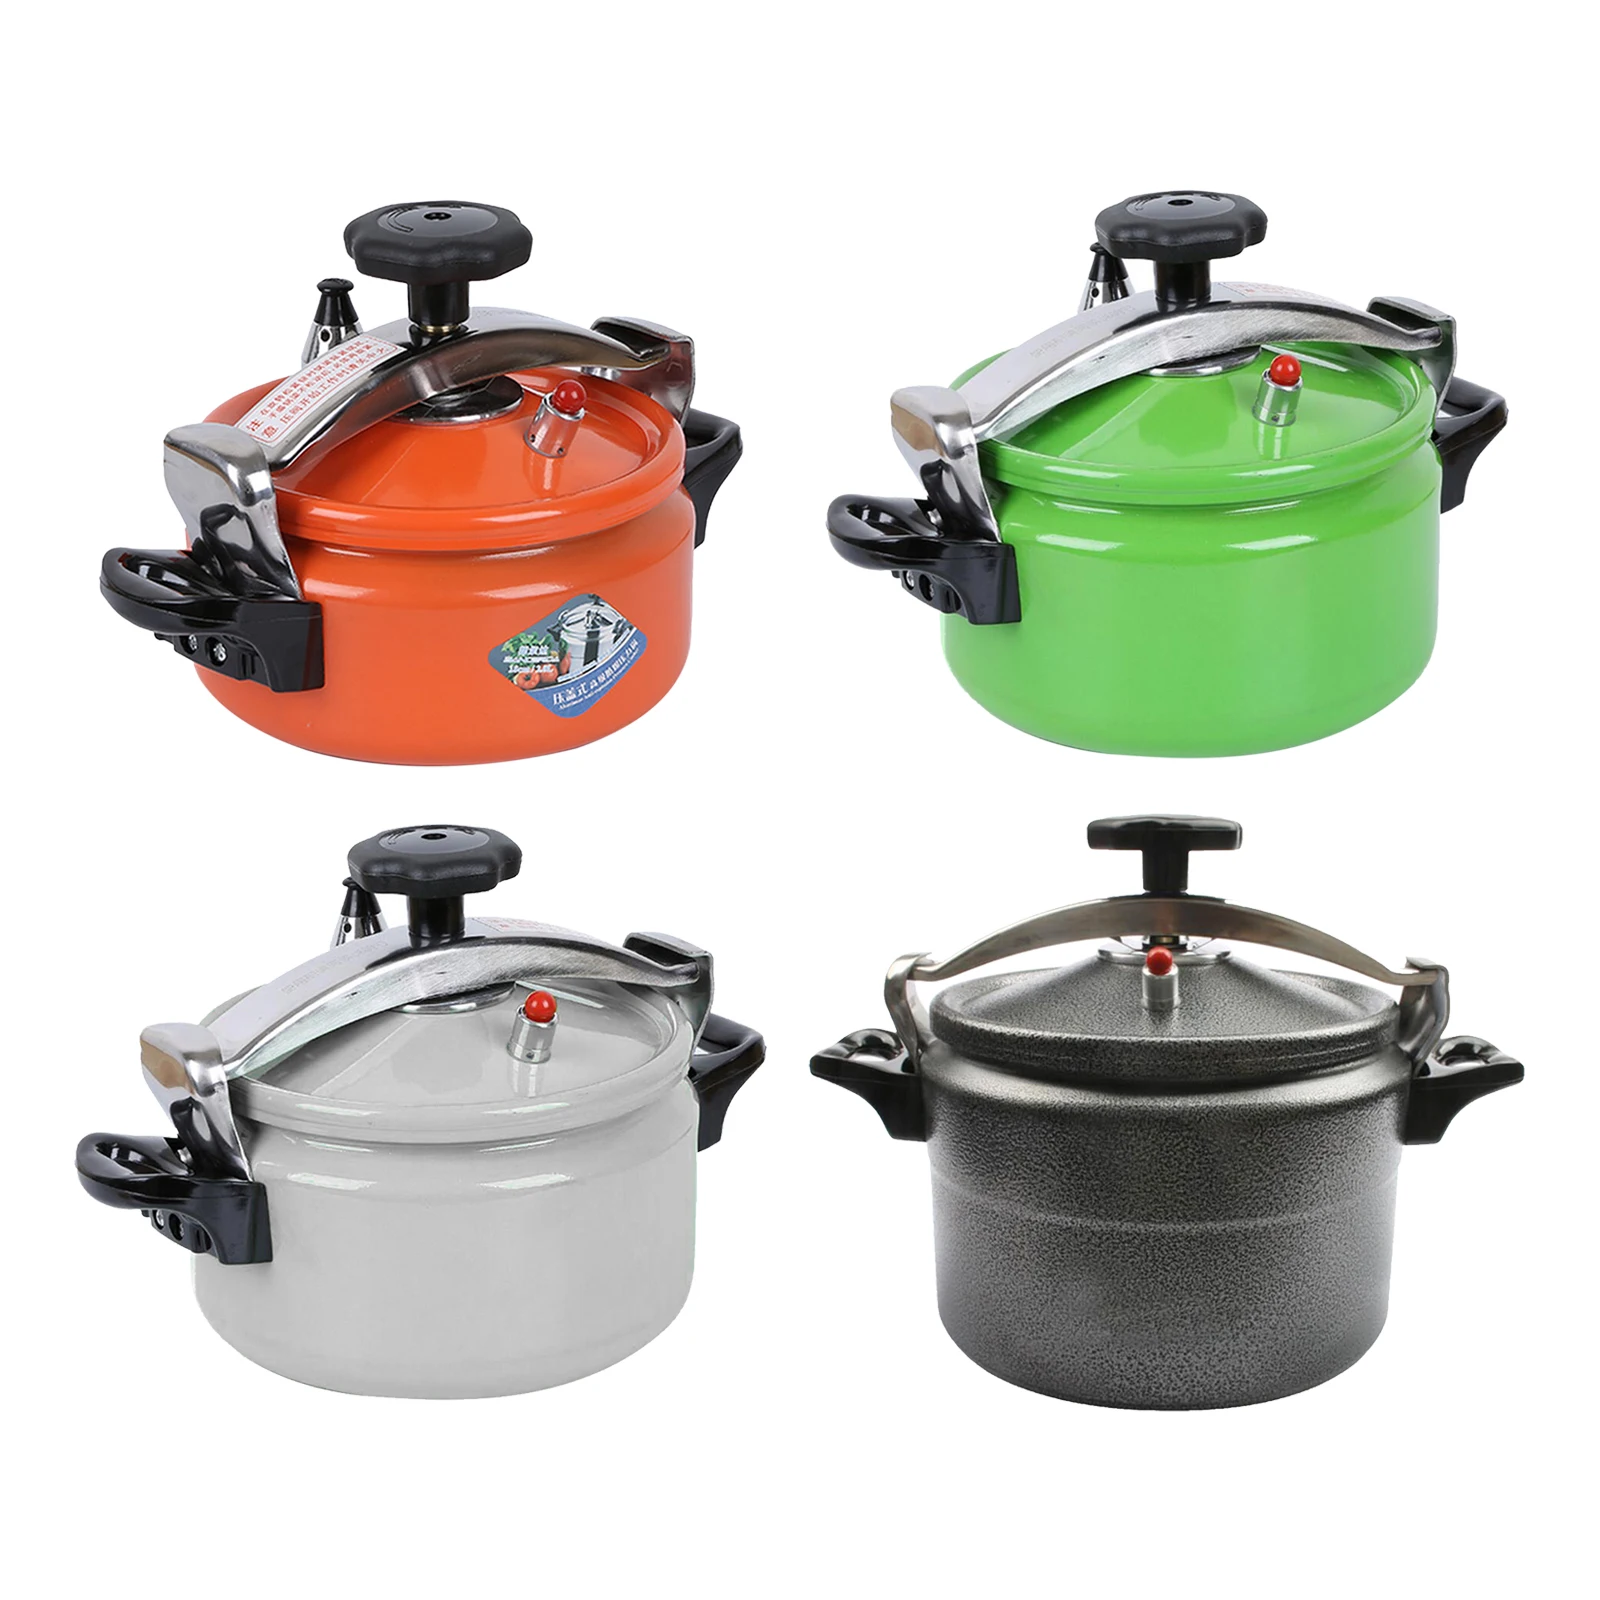 

Backpacking Slow For Ceramic Rice Camping Multi-functional Cooker Outdoor Pressure Soup Electric Cooker Pot Stove Cooking